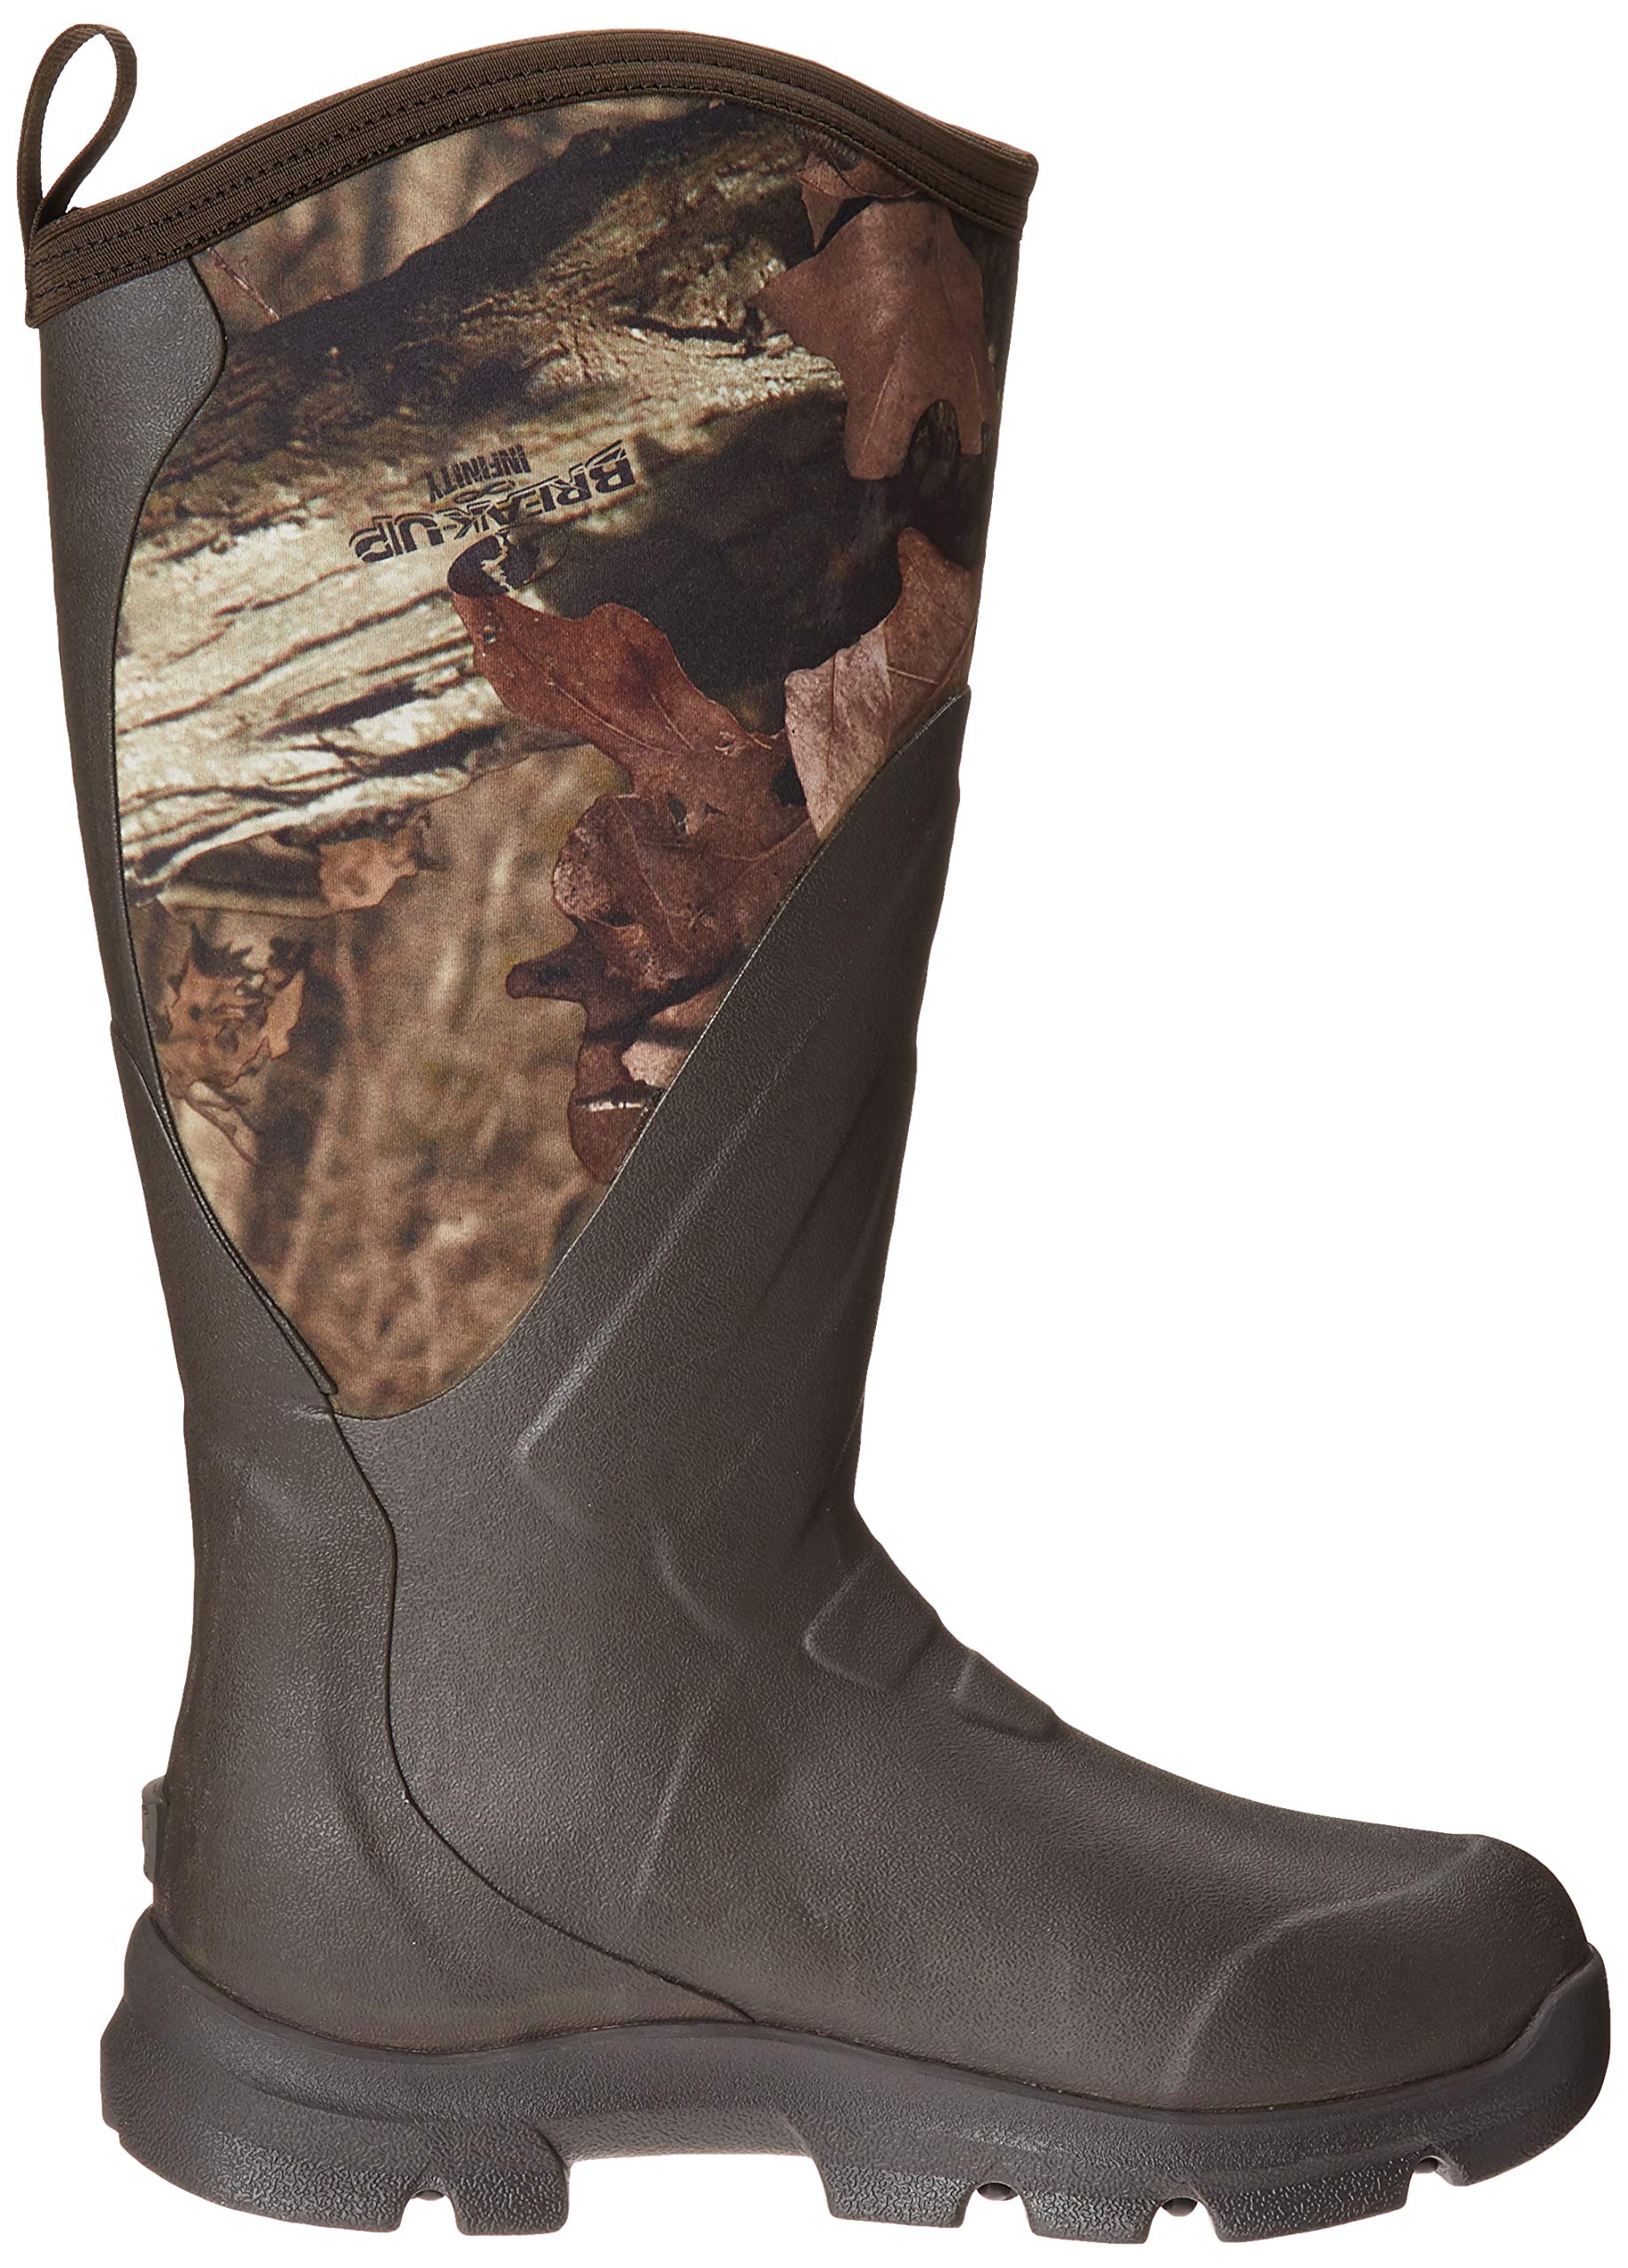 Muck Boot Men's Woody Grit Hunting Shoes